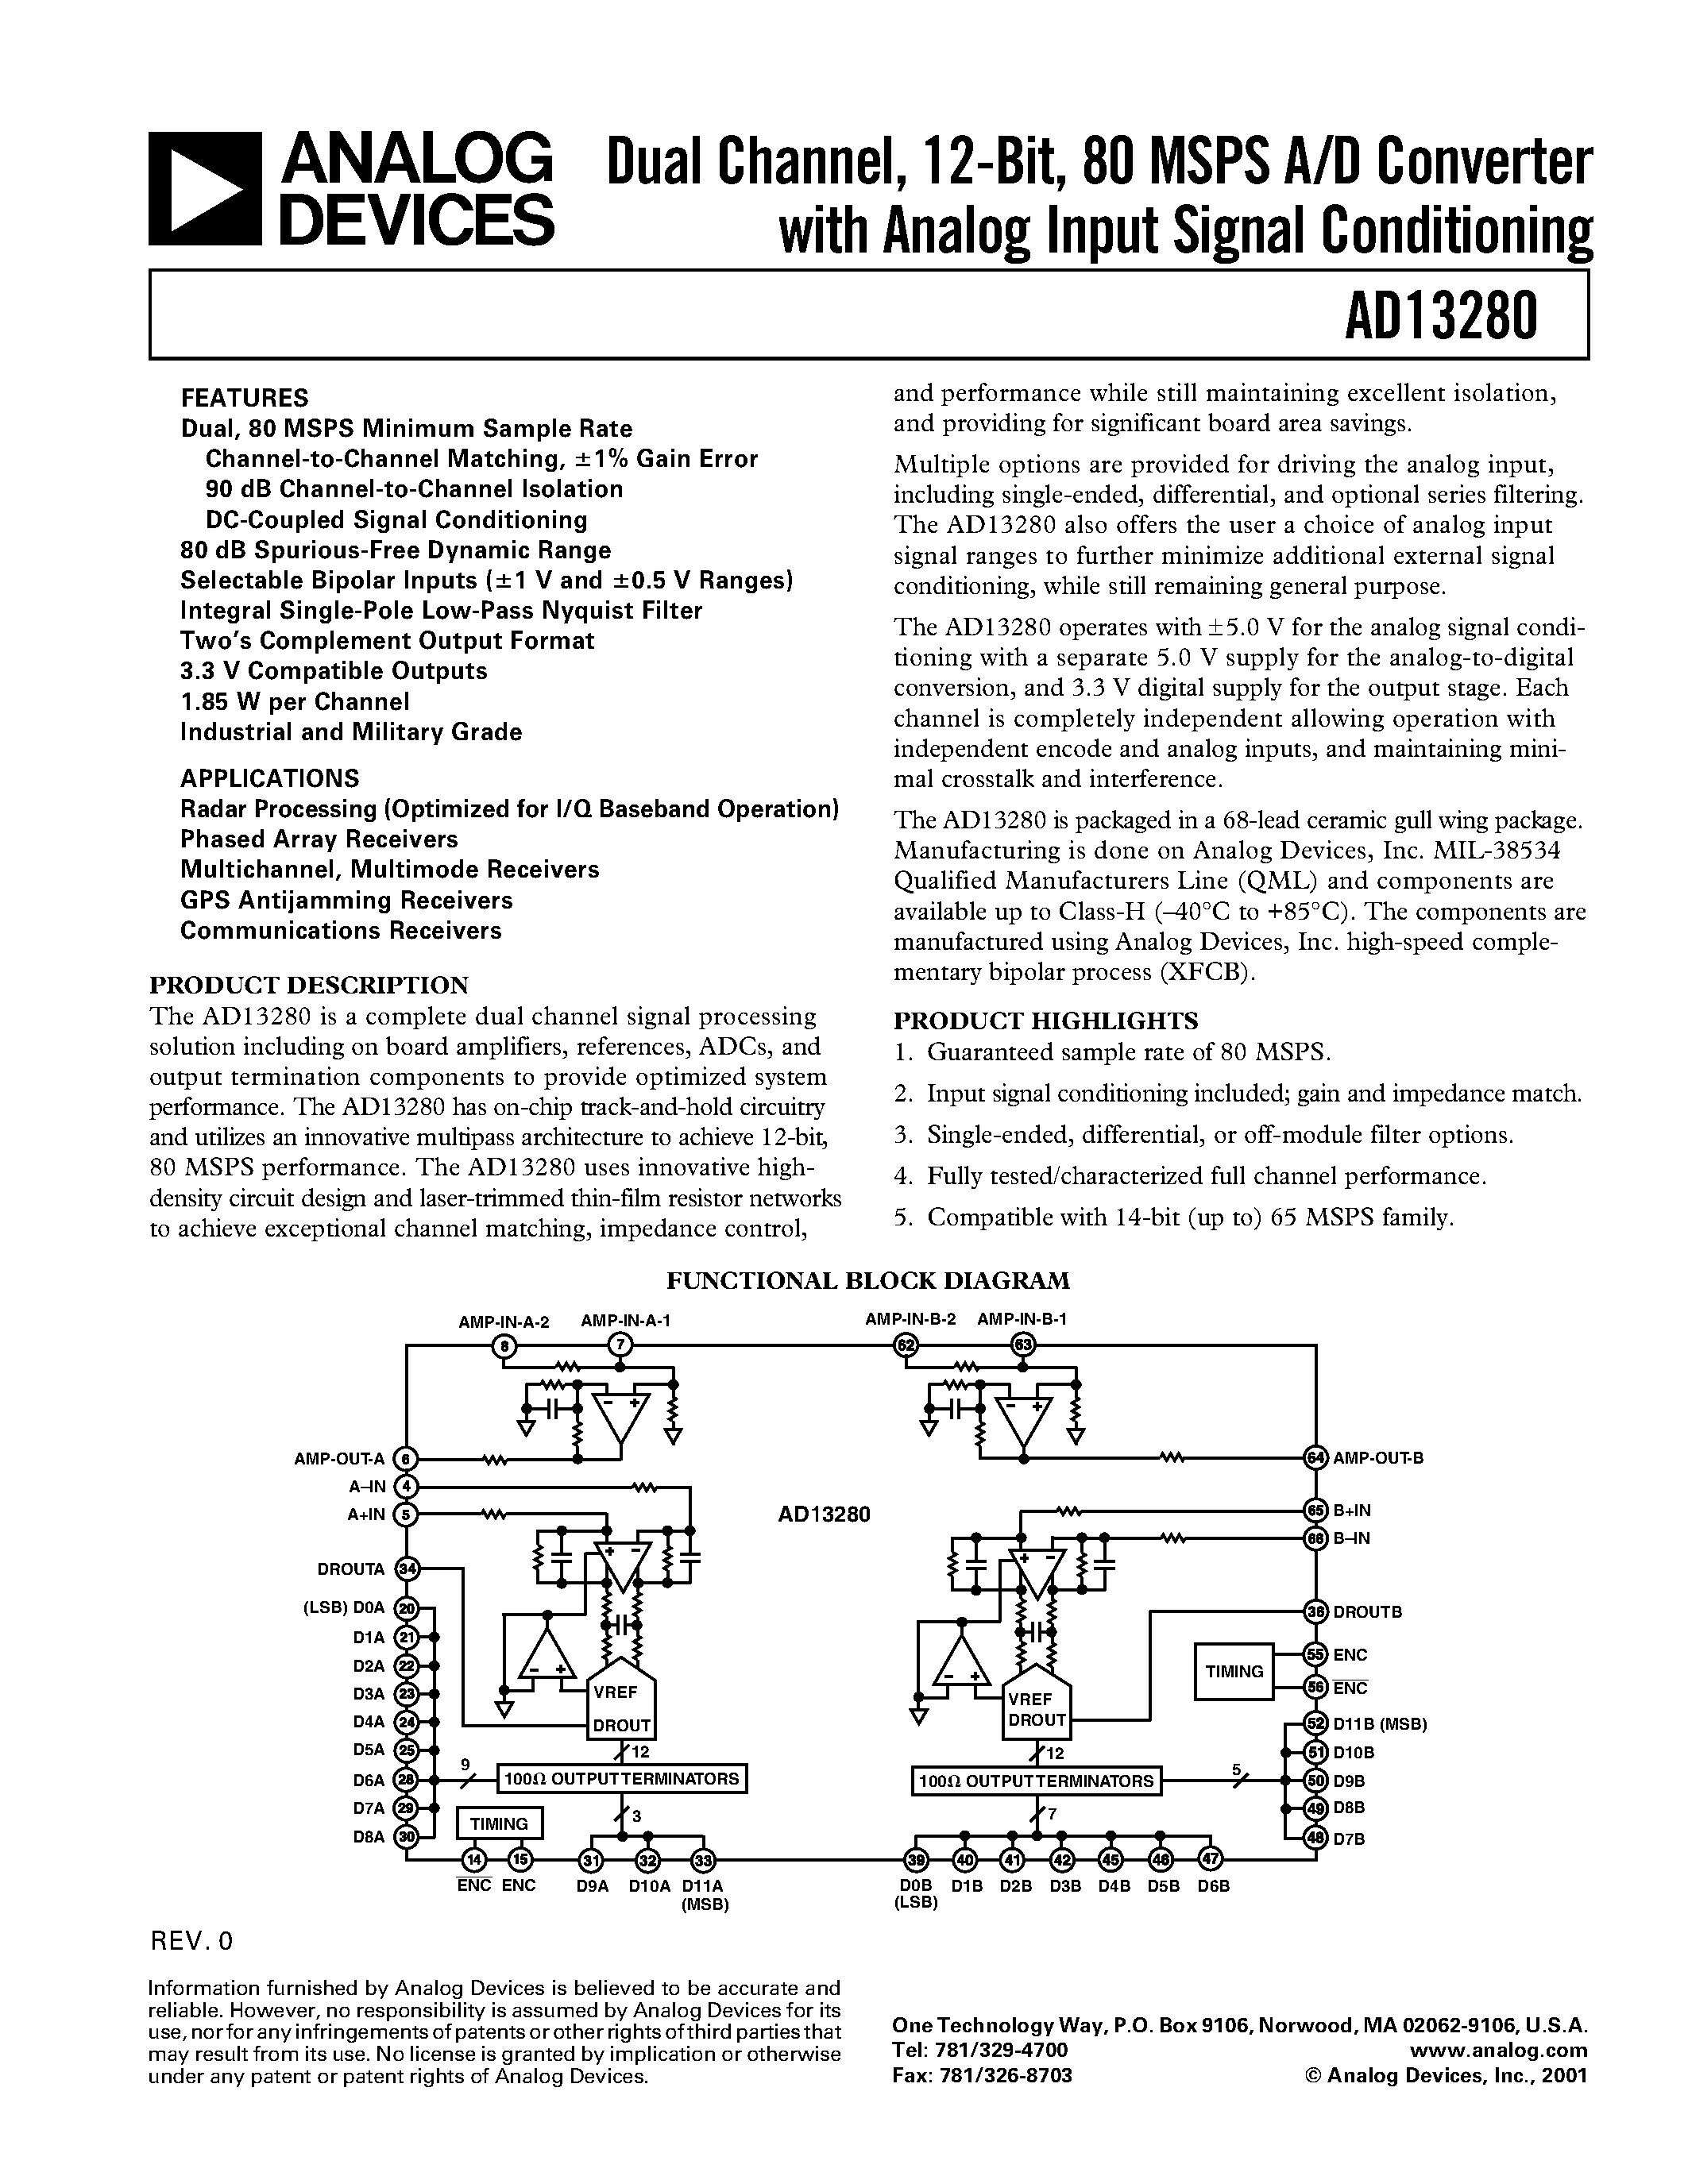 Даташит AD13280 - Dual Channel/ 12-Bit/ 80 MSPS A/D Converter with Analog Input Signal Conditioning страница 1